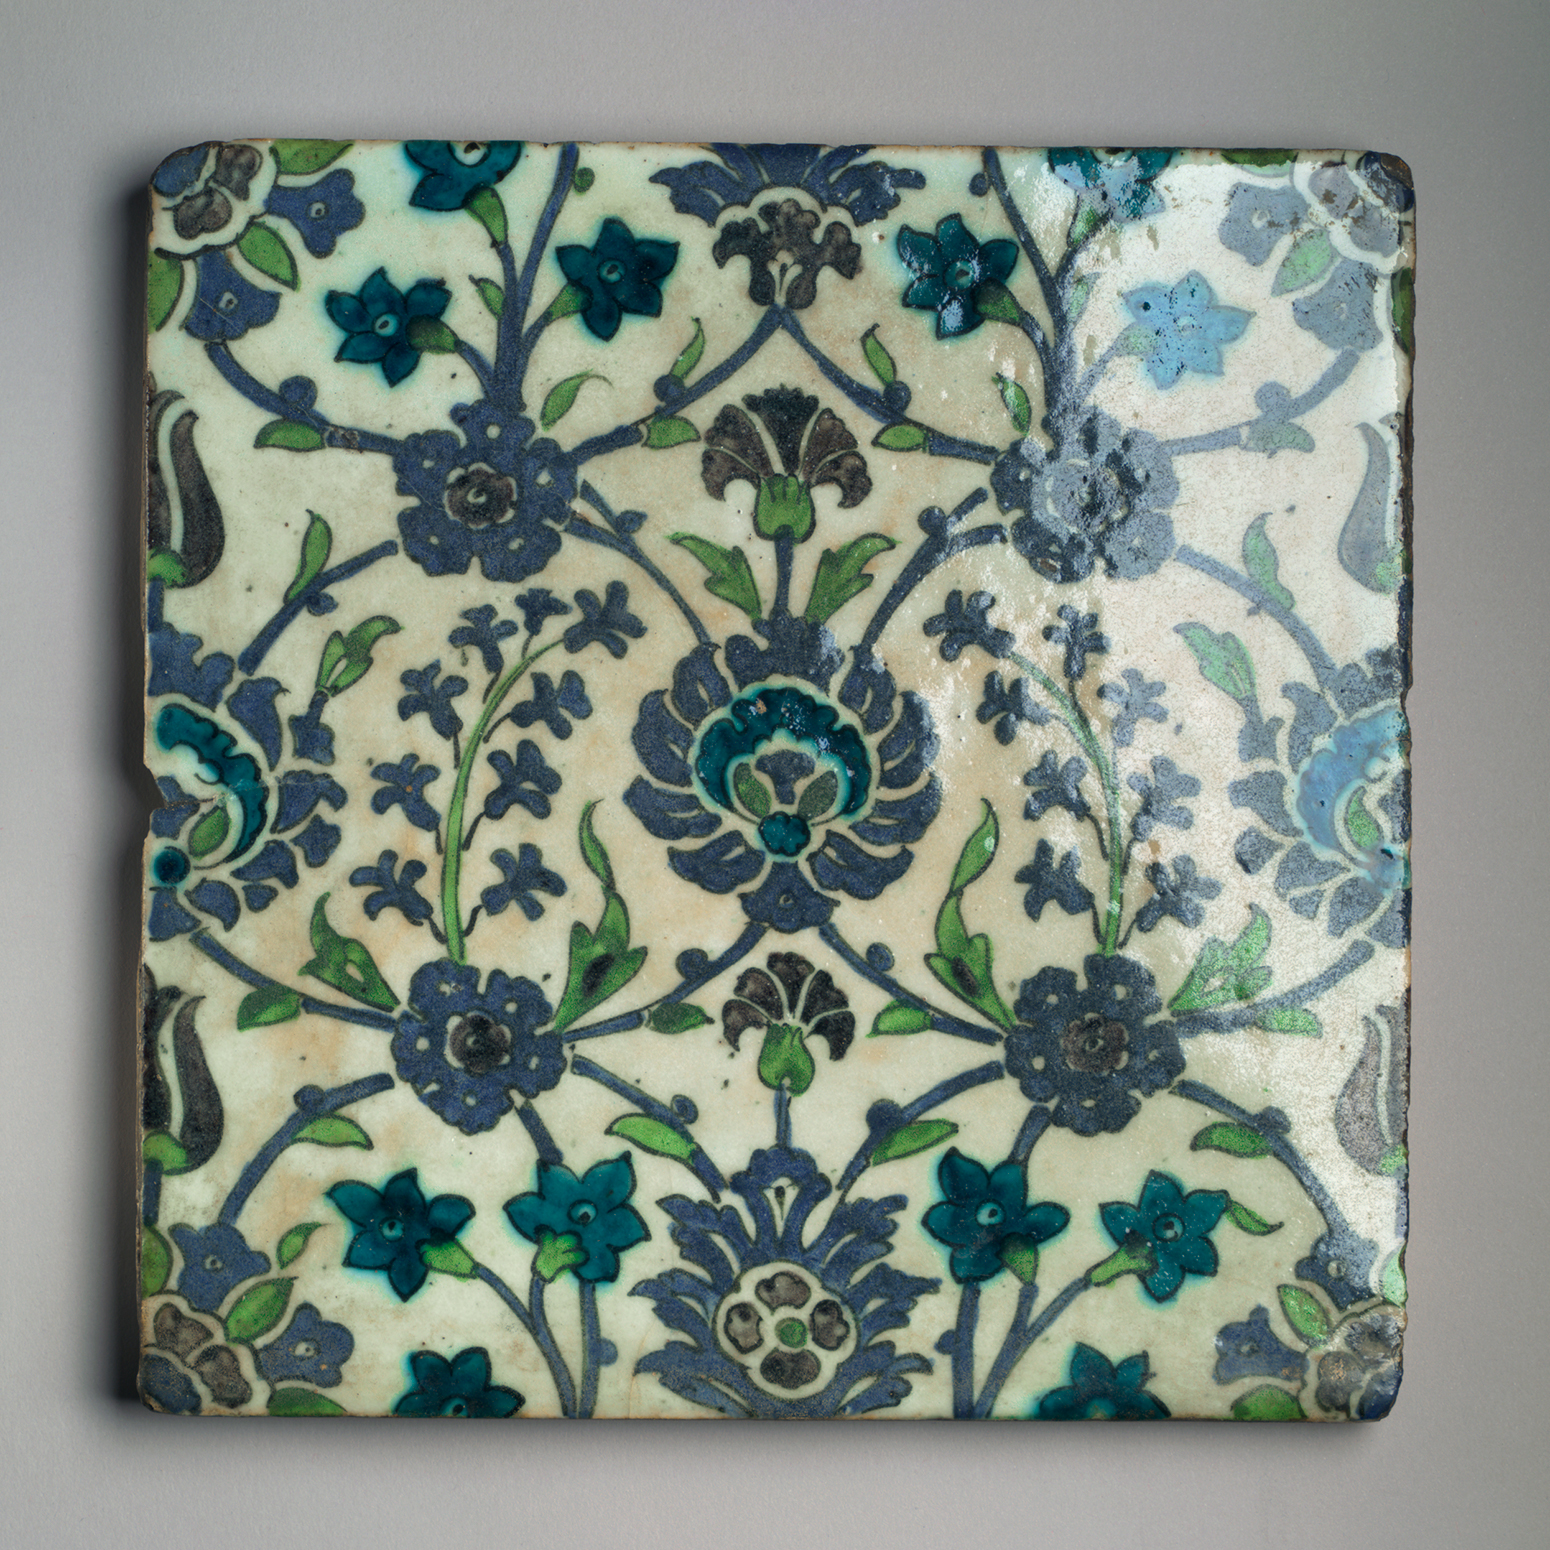 An off-white square tile with floral motifs in blue and green